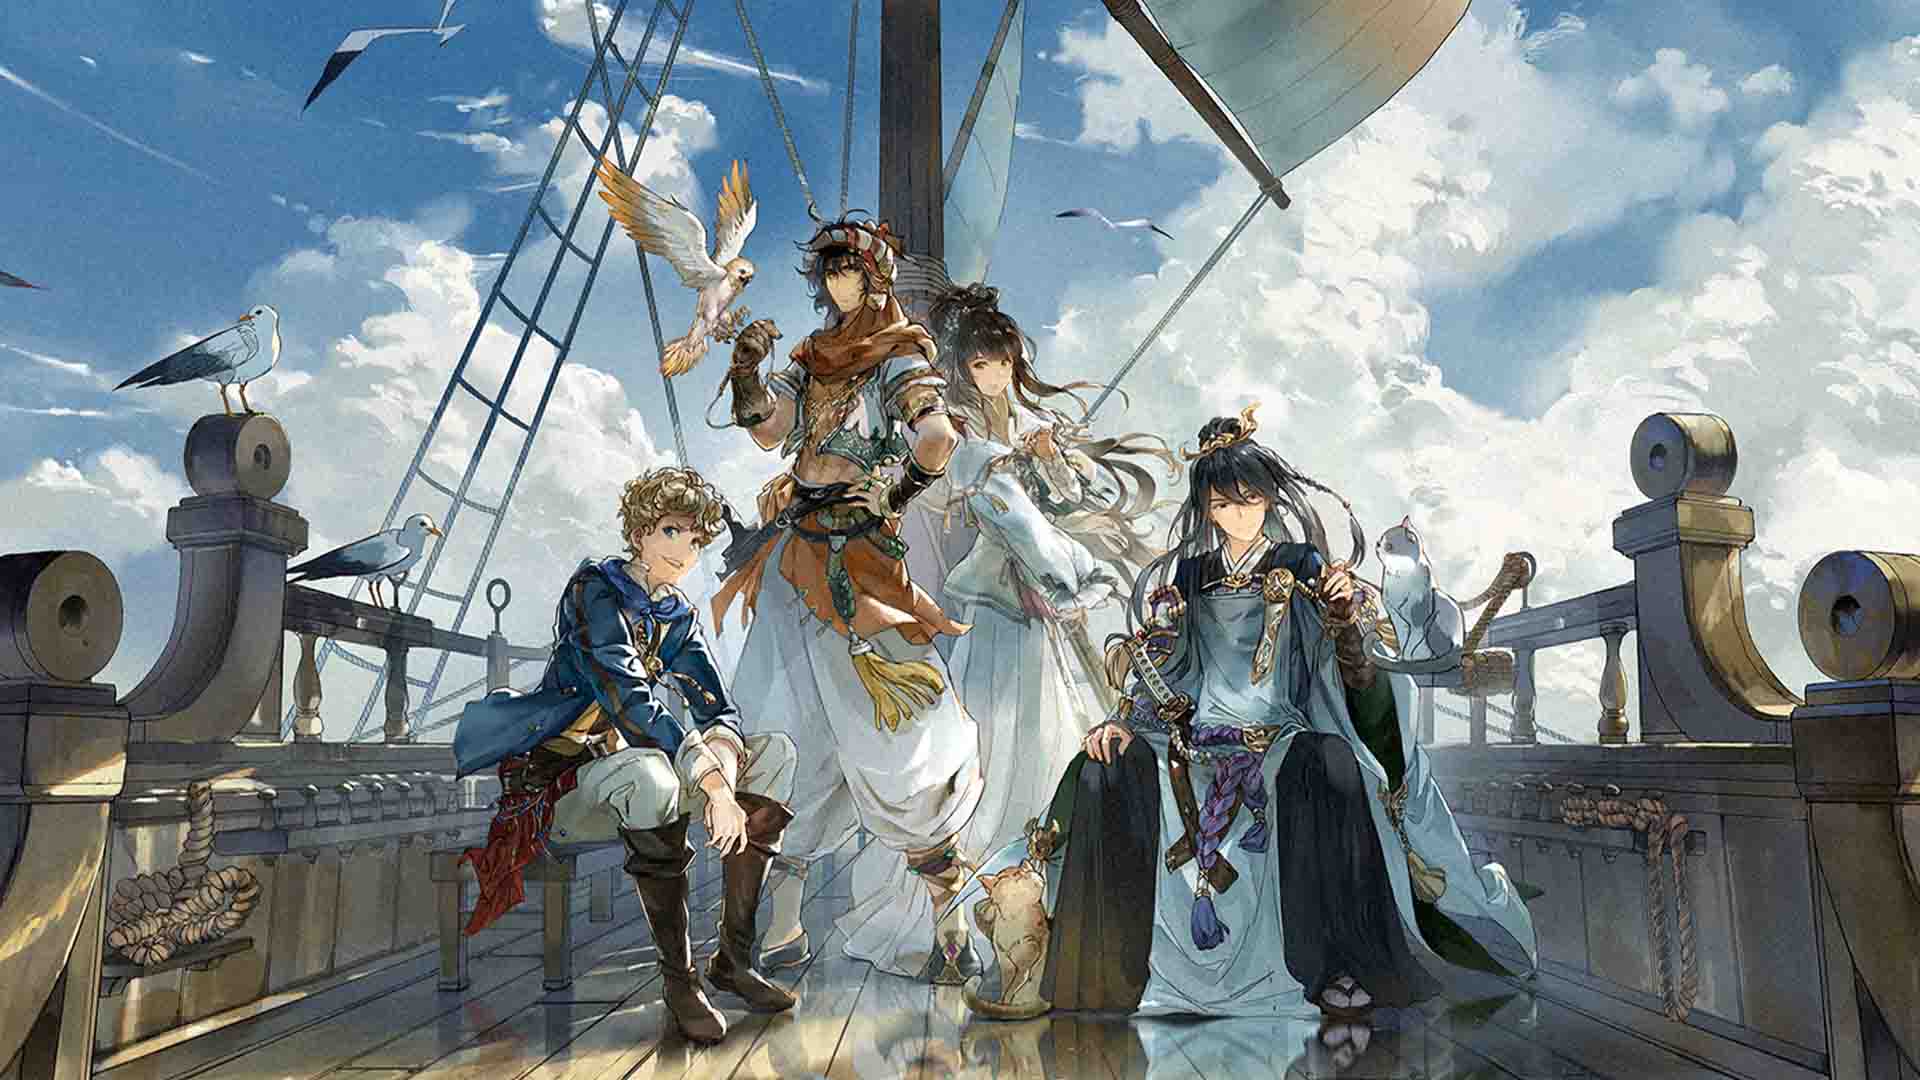 Digitally Downloaded covers Sailing Era, a game that has just released on PC and is coming to consoles later this year.